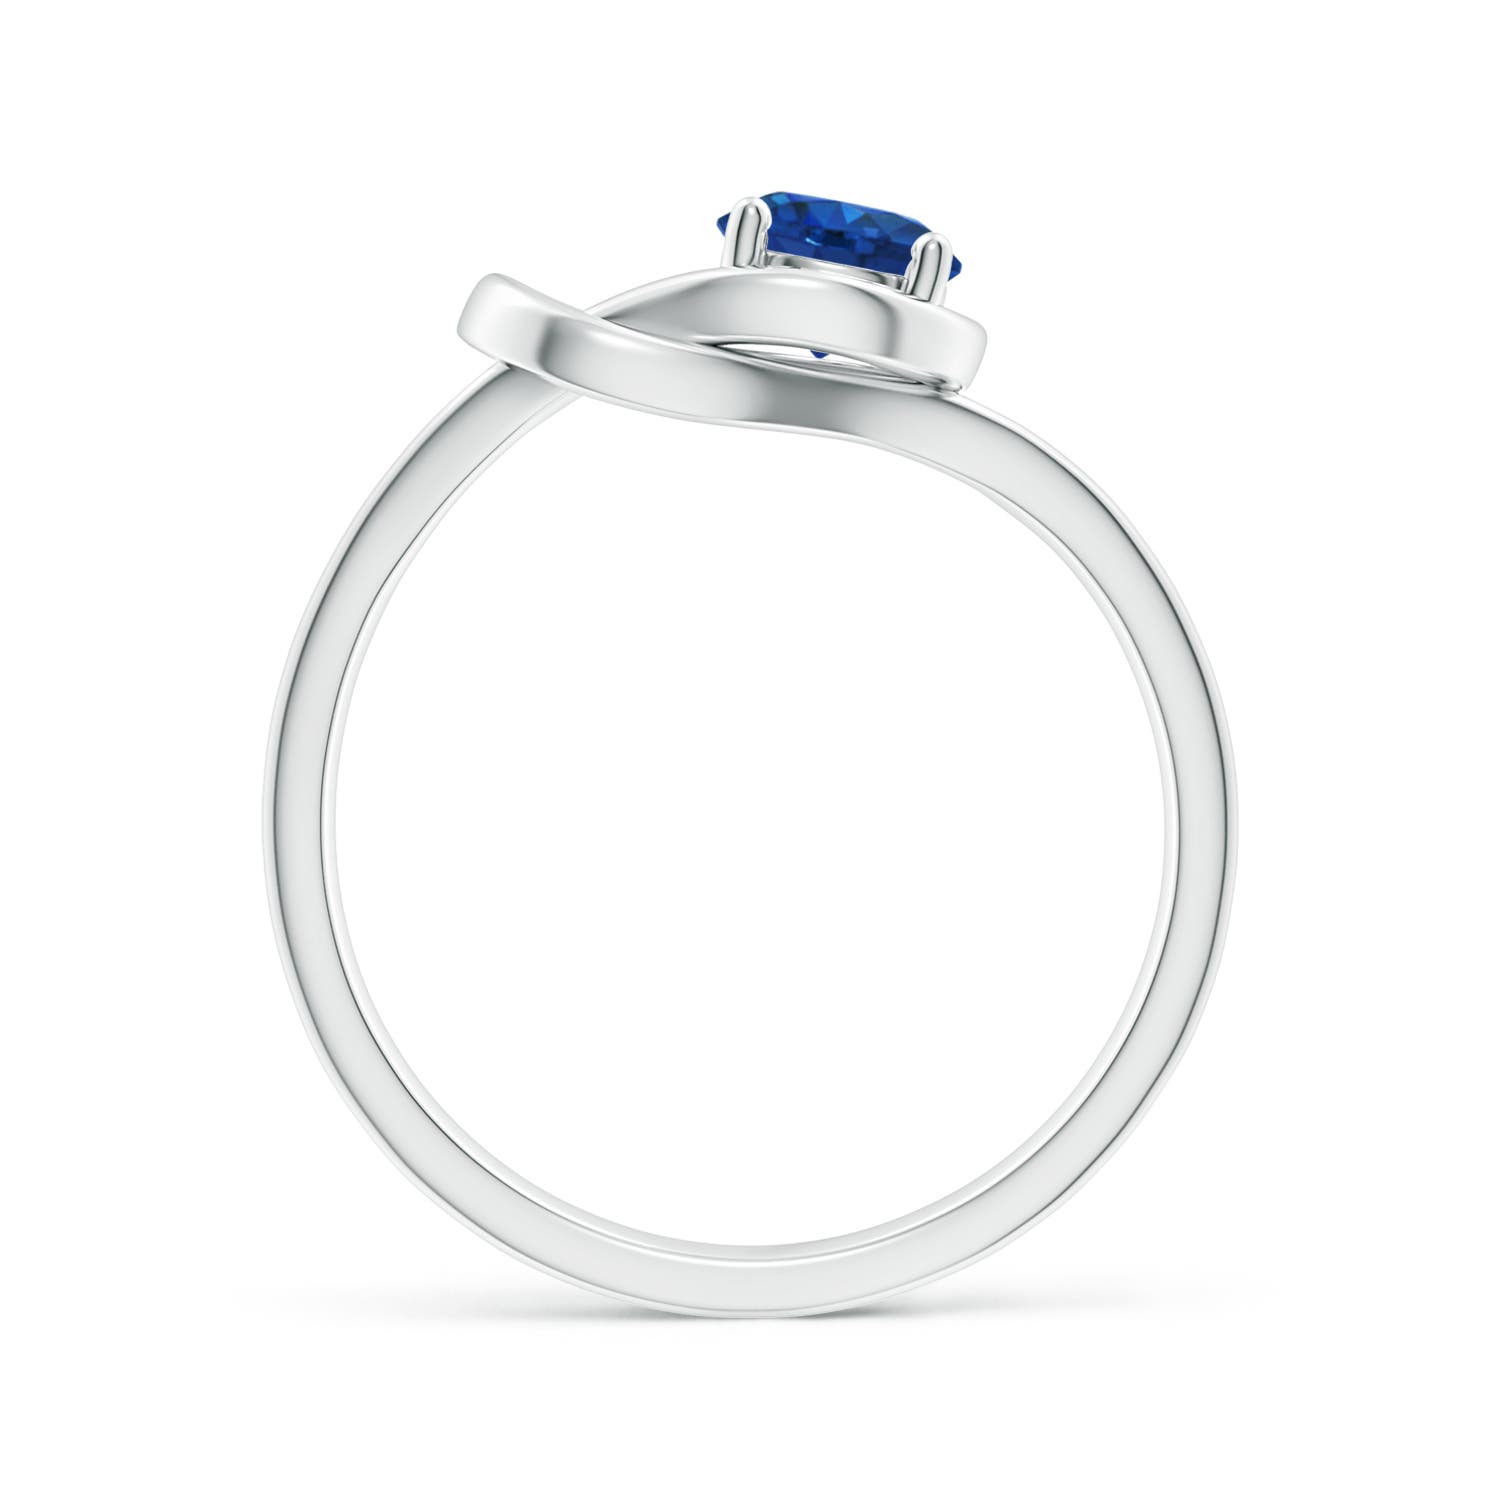 AAA - Blue Sapphire / 0.6 CT / 14 KT White Gold